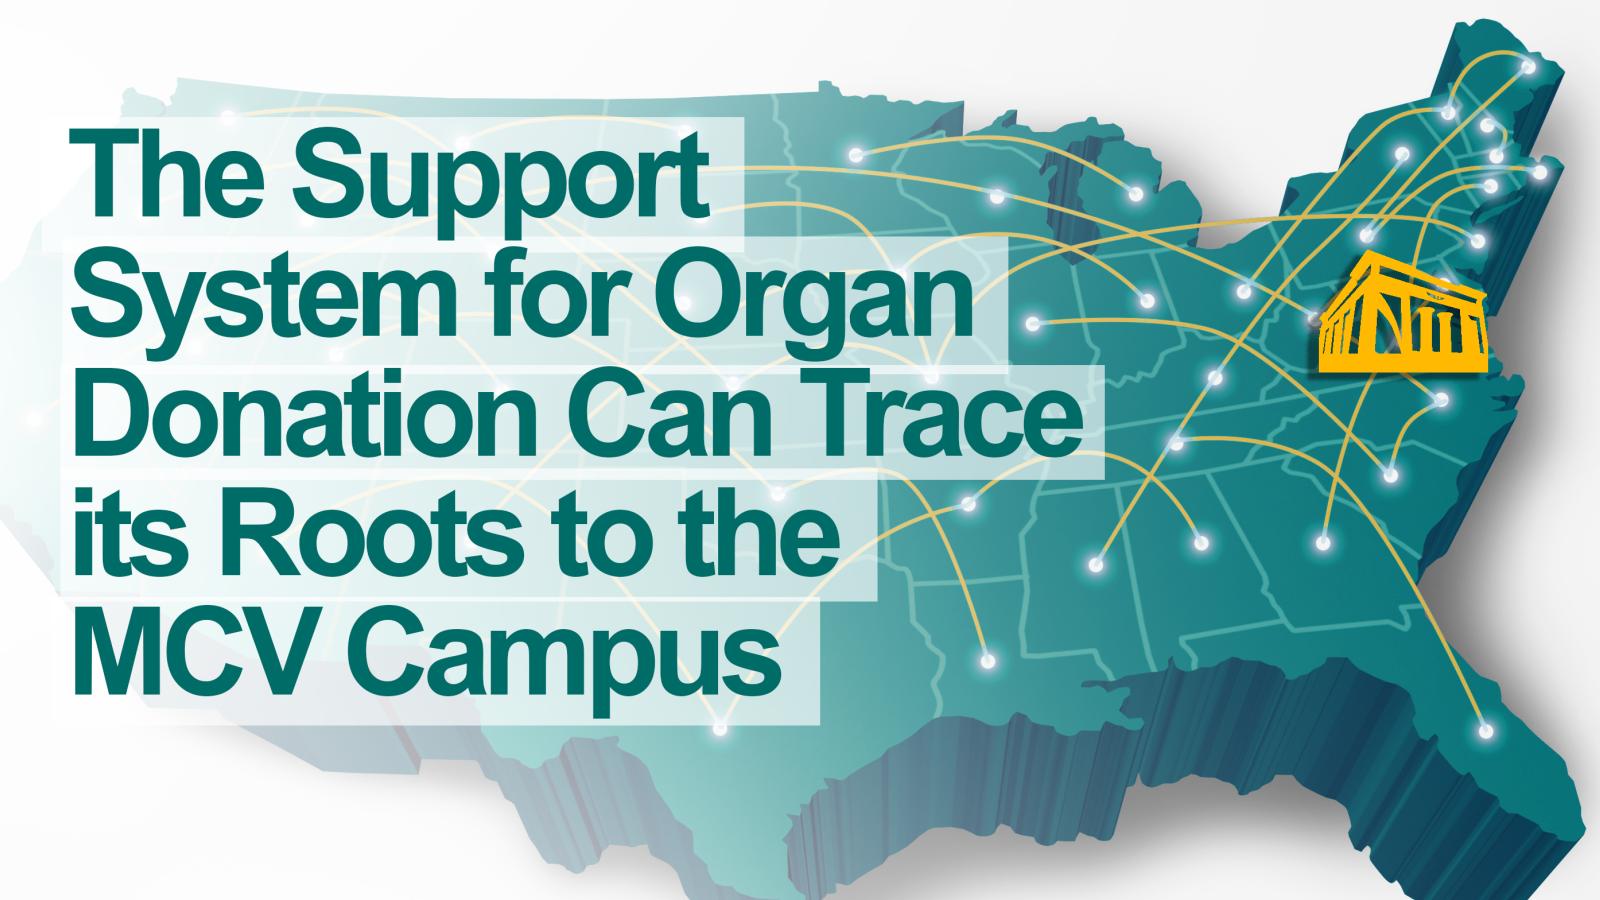 The support system for organ donation can trace its roots to the MCV Campus